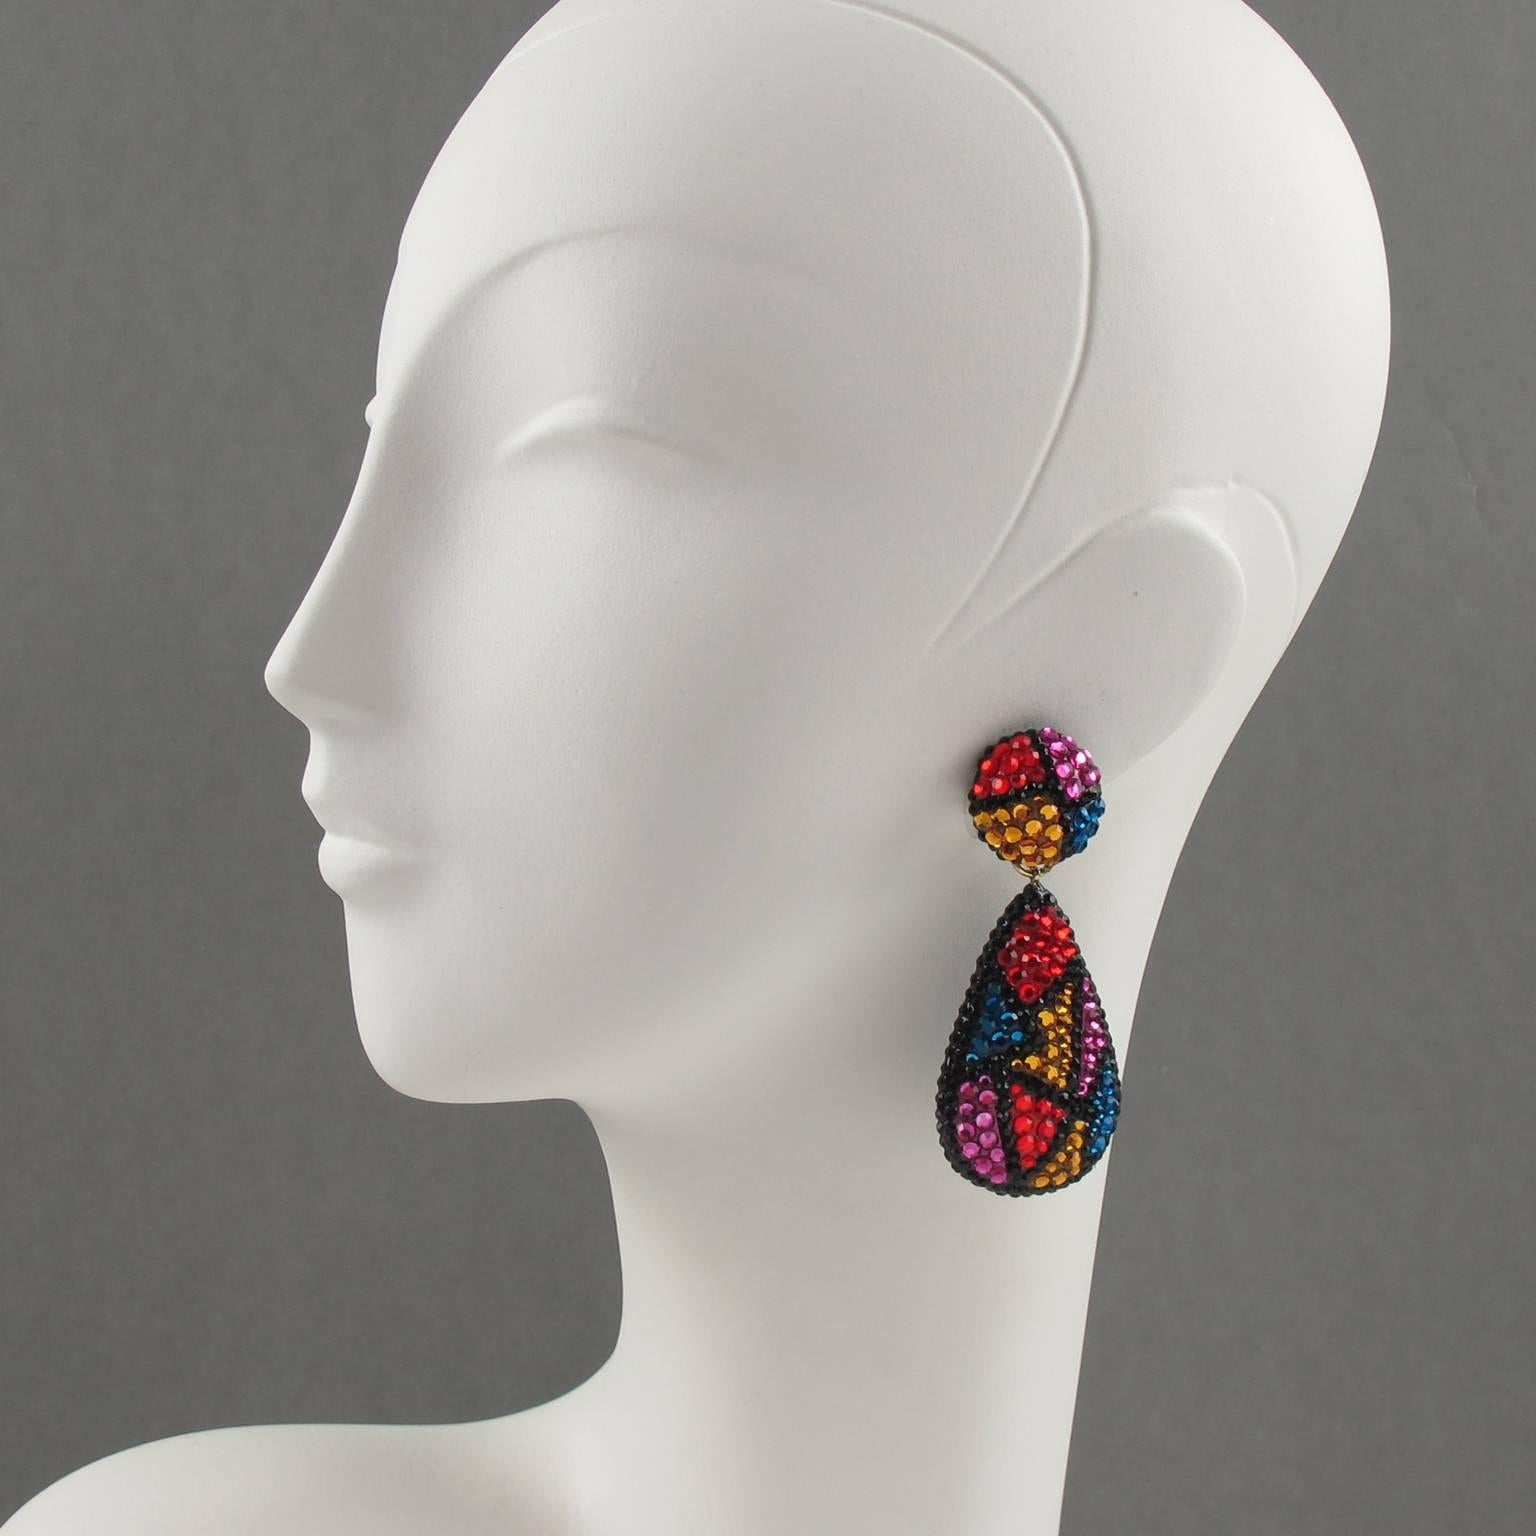 Fabulous statement clip on earrings designed by Richard Kerr in the 1980s. They are made up of his signature pave rhinestones. Featuring dangle geometric shape all covered with multicolor rhinestones. Assorted colors of red, amber, pink, blue and